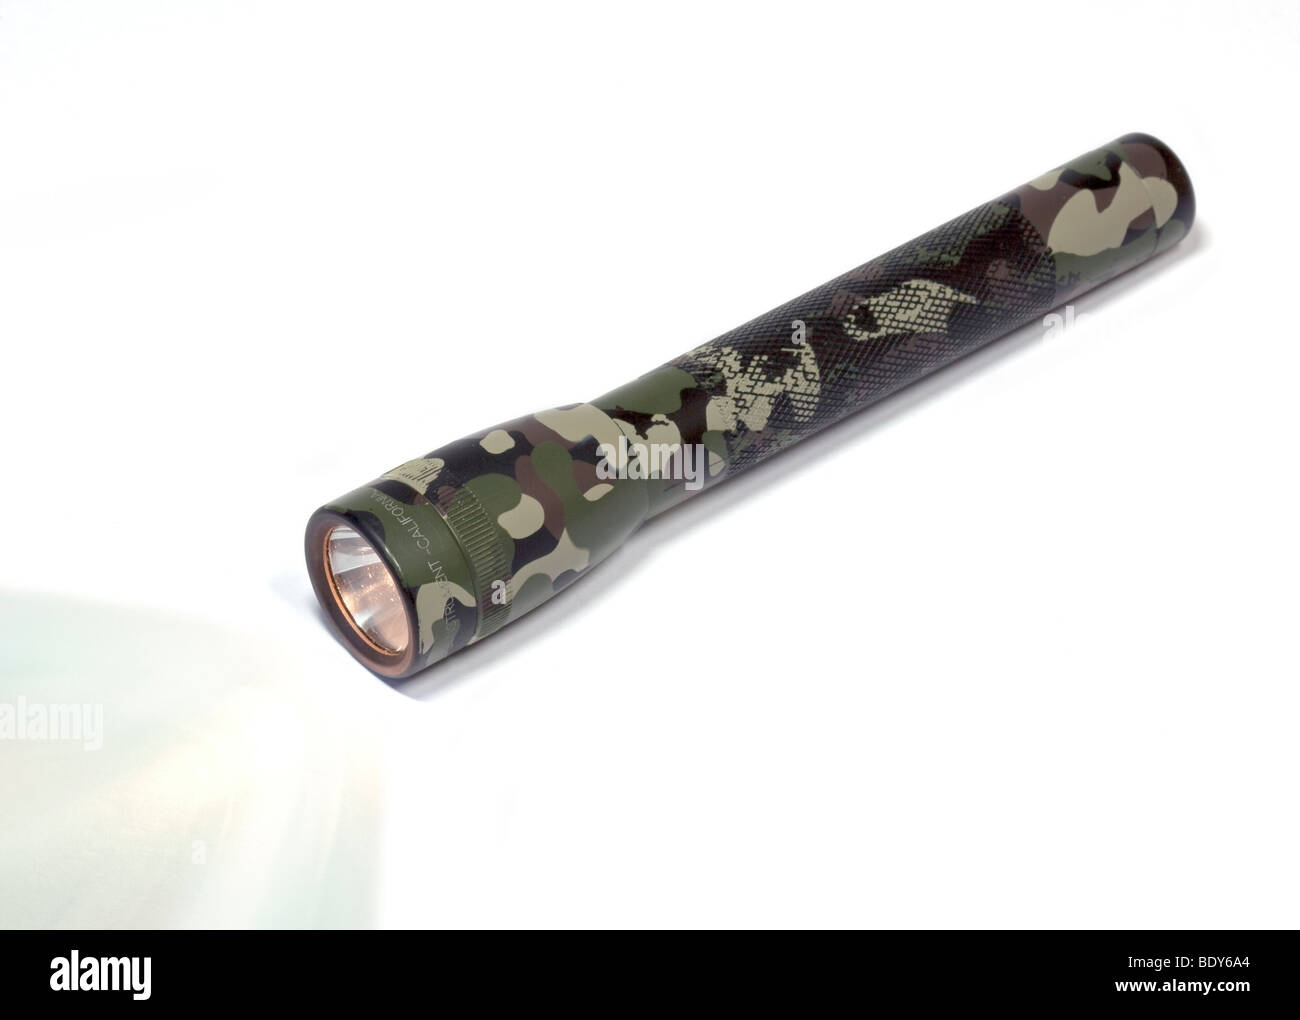 Camouflage-patterned Maglite Torch Stock Photo